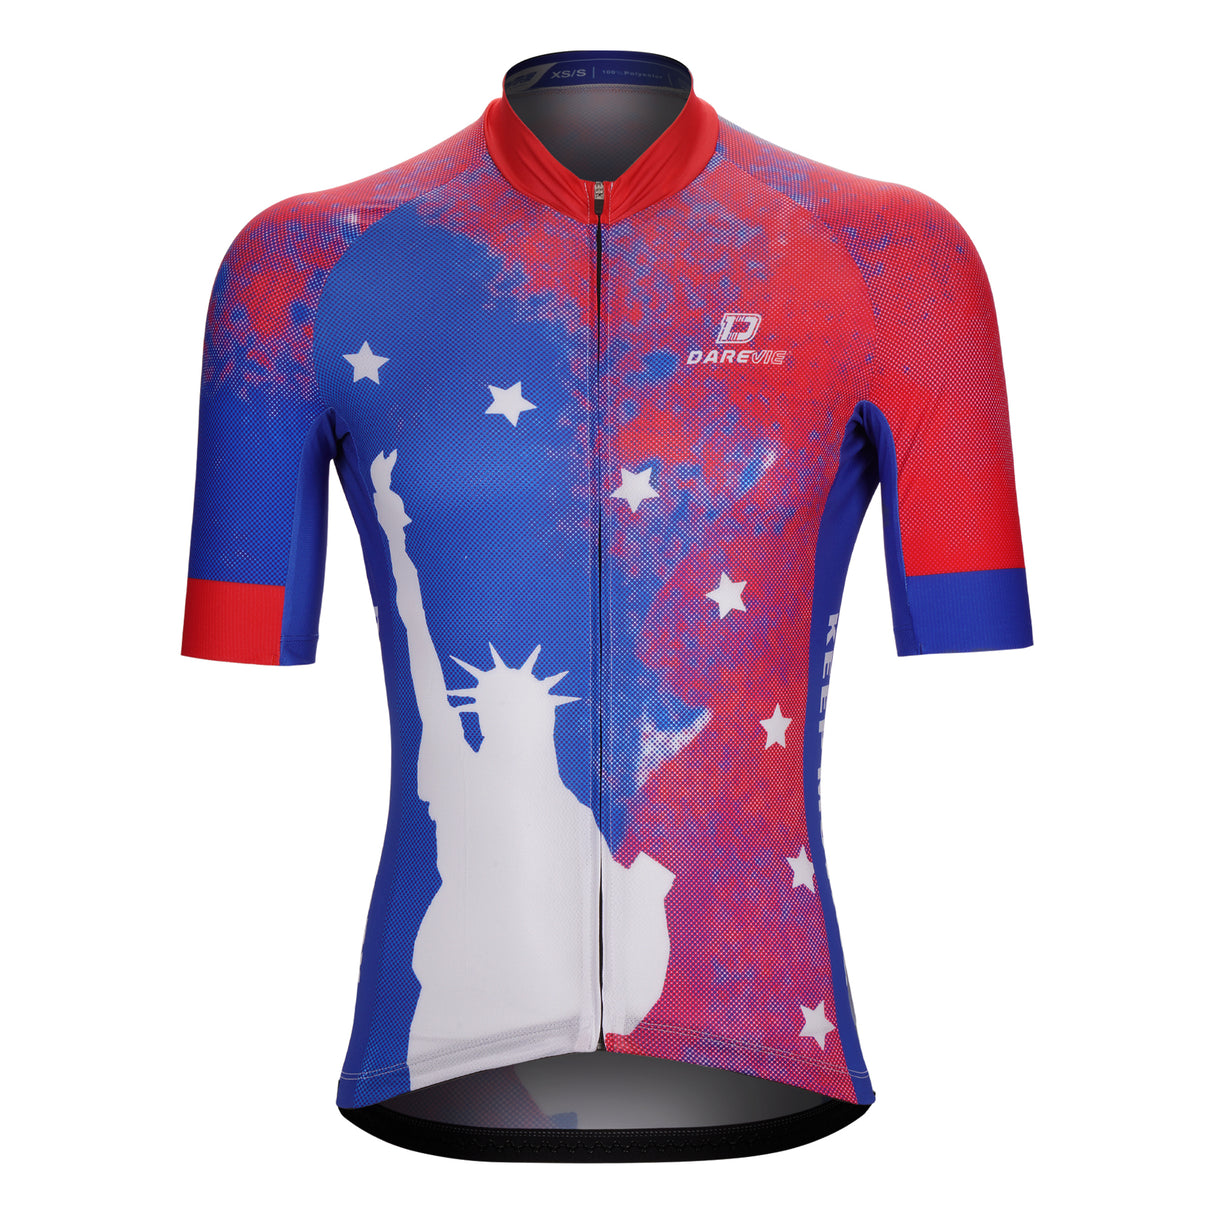 INDEPENDENCE DAY SPECIAL JERSEY